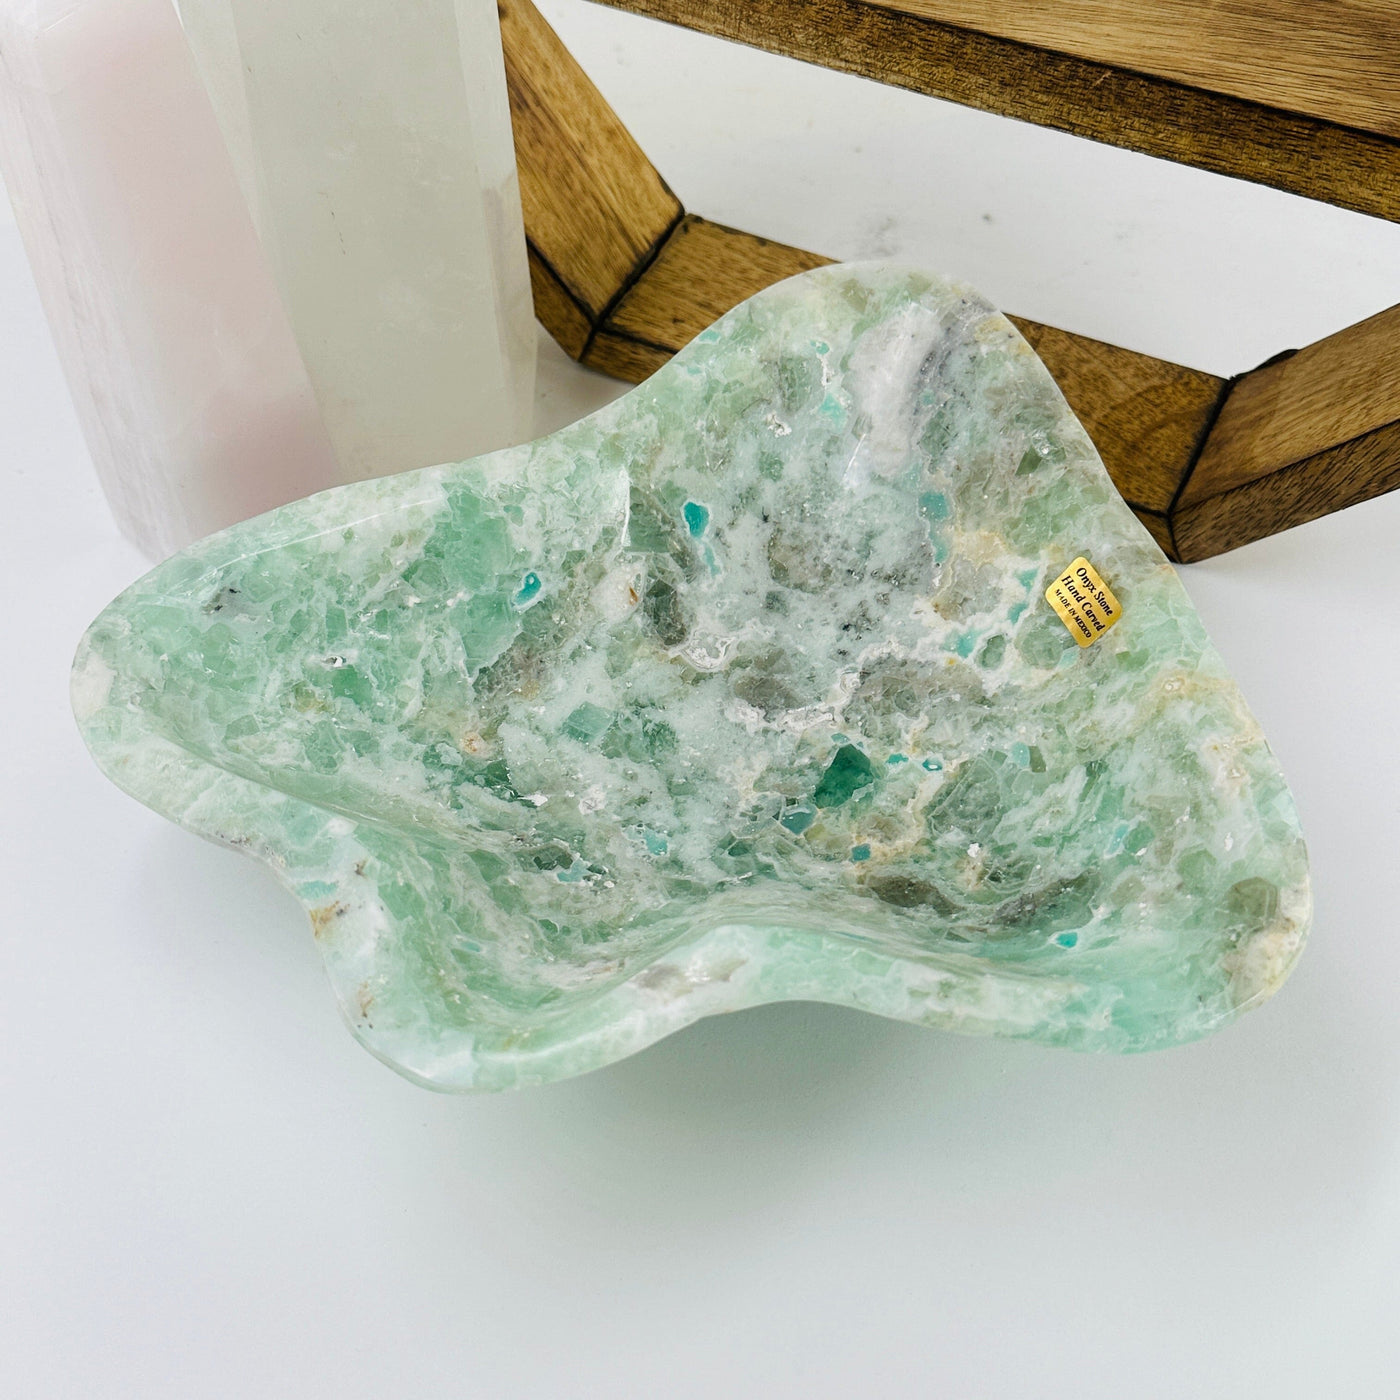 fluorite bowl with decorations in the background